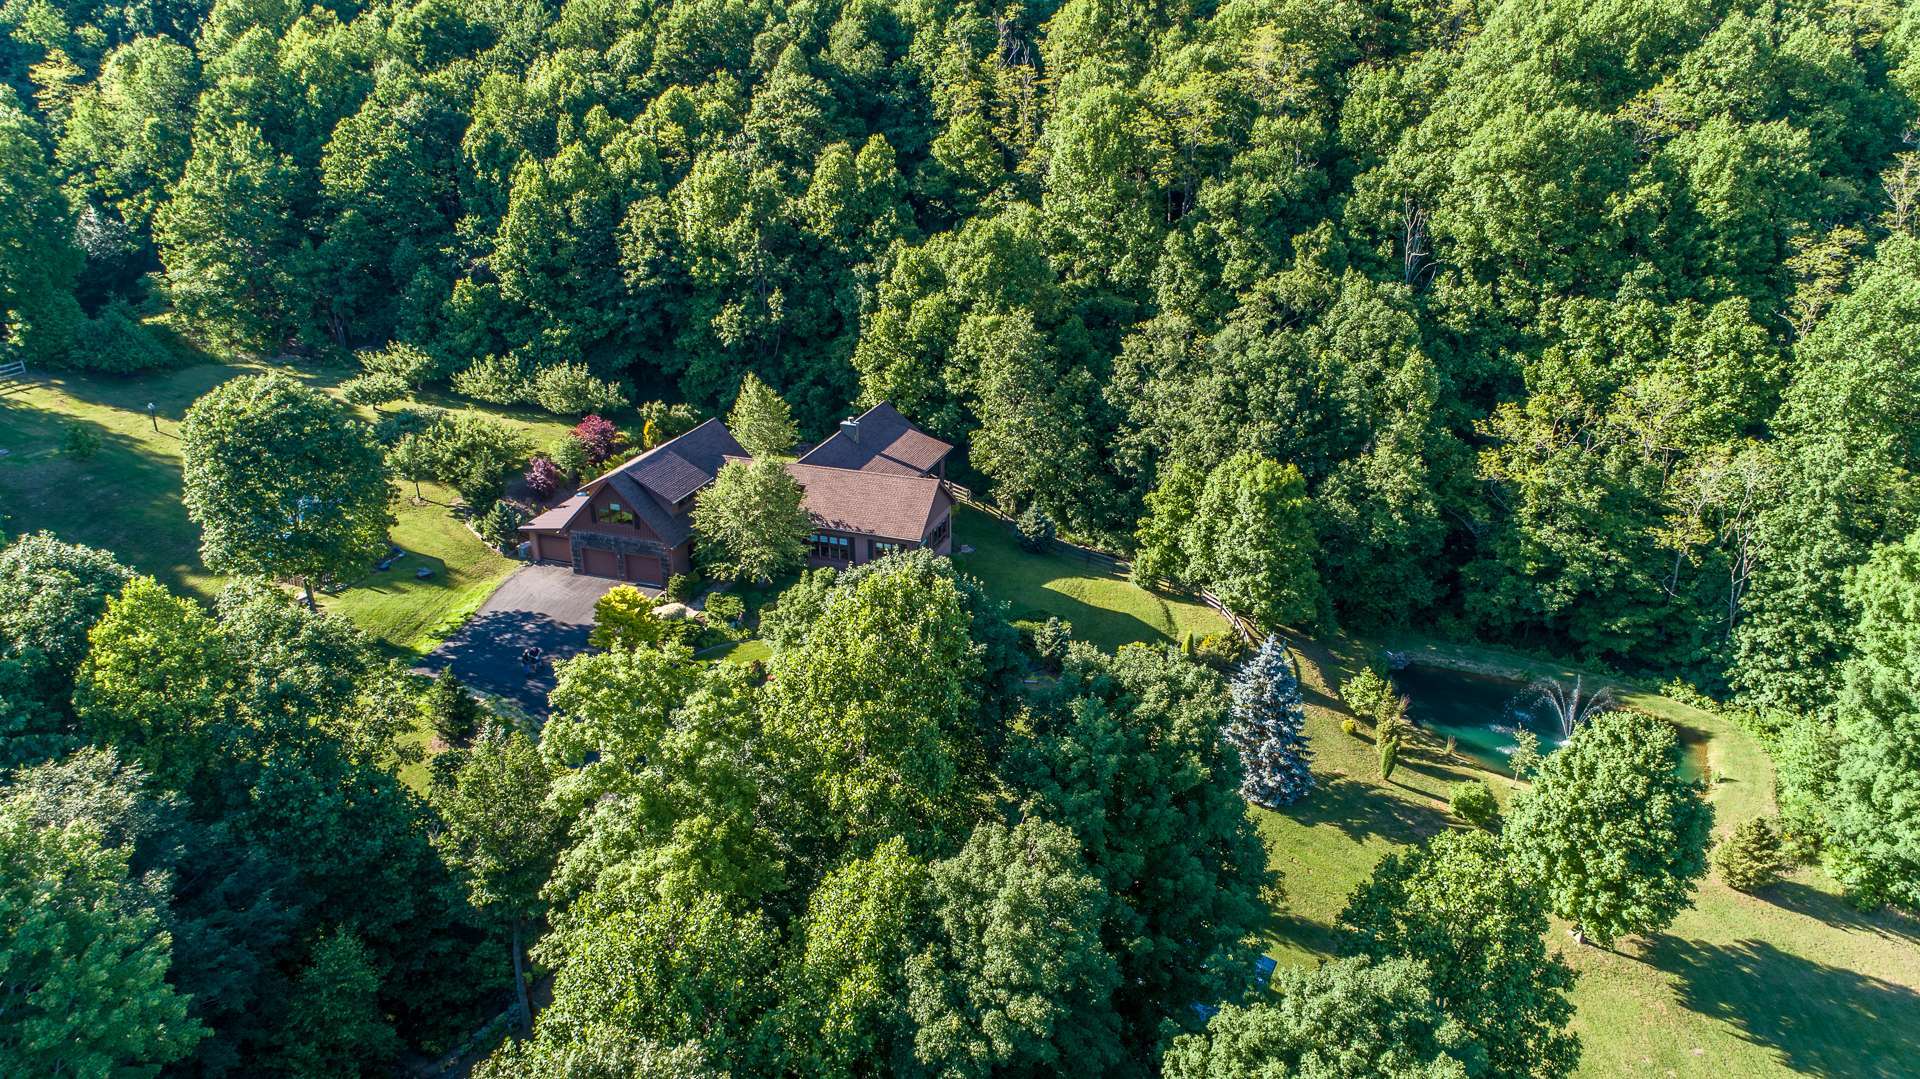 INVEST in an elegant mountain lifestyle found here in this meticulously cared for 3-bedroom, 3.5-bath custom home nestled among a beautifully landscaped 8 acre setting flanked by Conservation land and towered by Bluff and Paddy Mountains.  This unique mountain property is offered at $860,000. F170